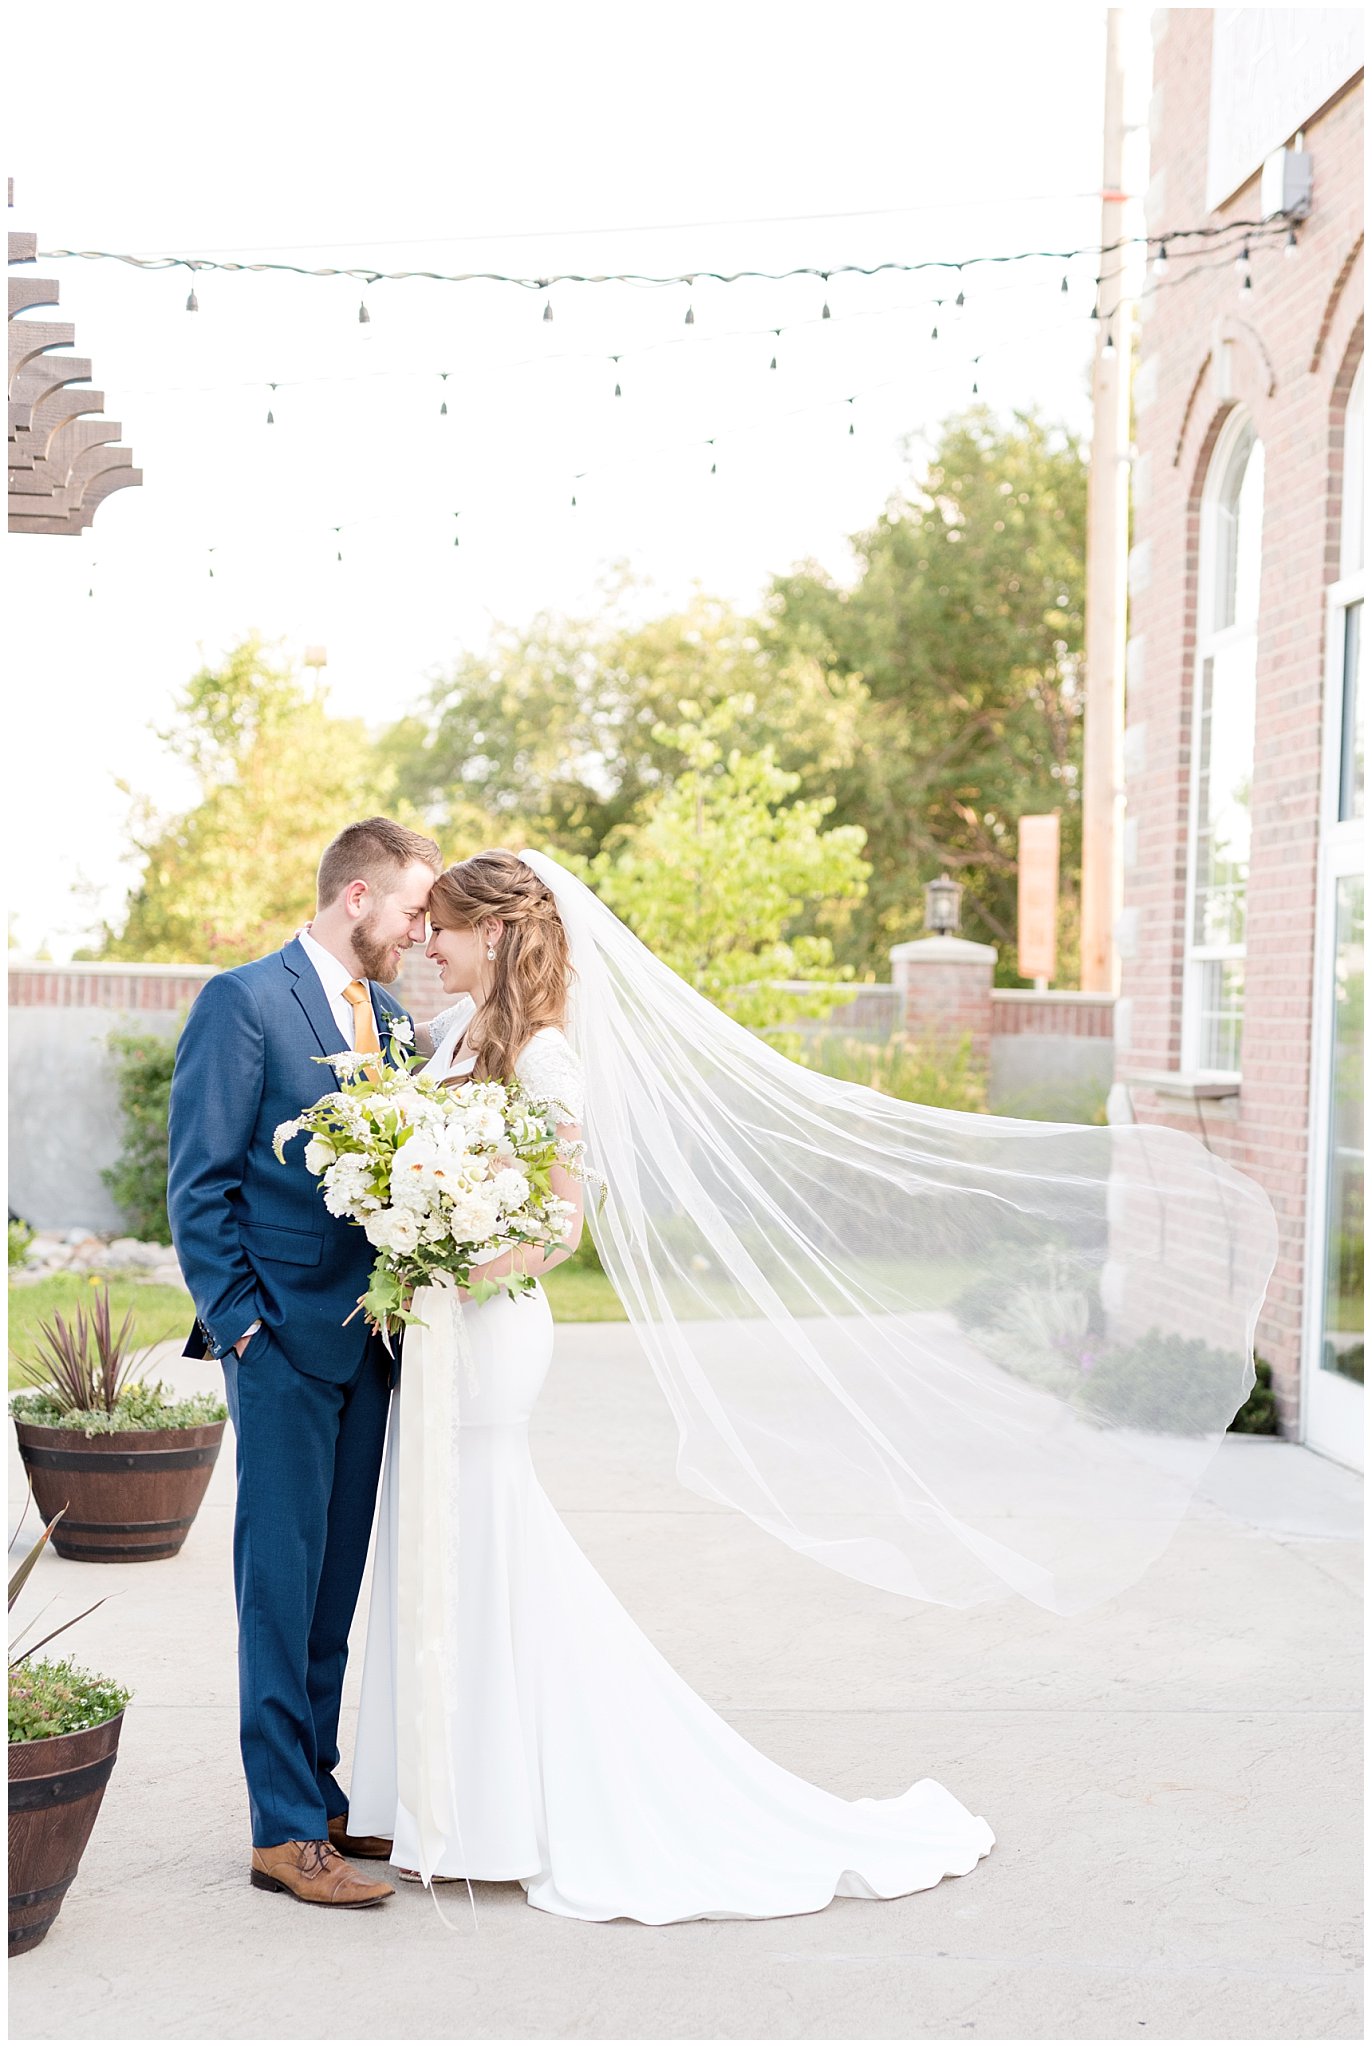 Bride and groom portraits with veil | gold, navy and white wedding | Talia Event Center | Utah Wedding Photography | Jessie and Dallin Photography